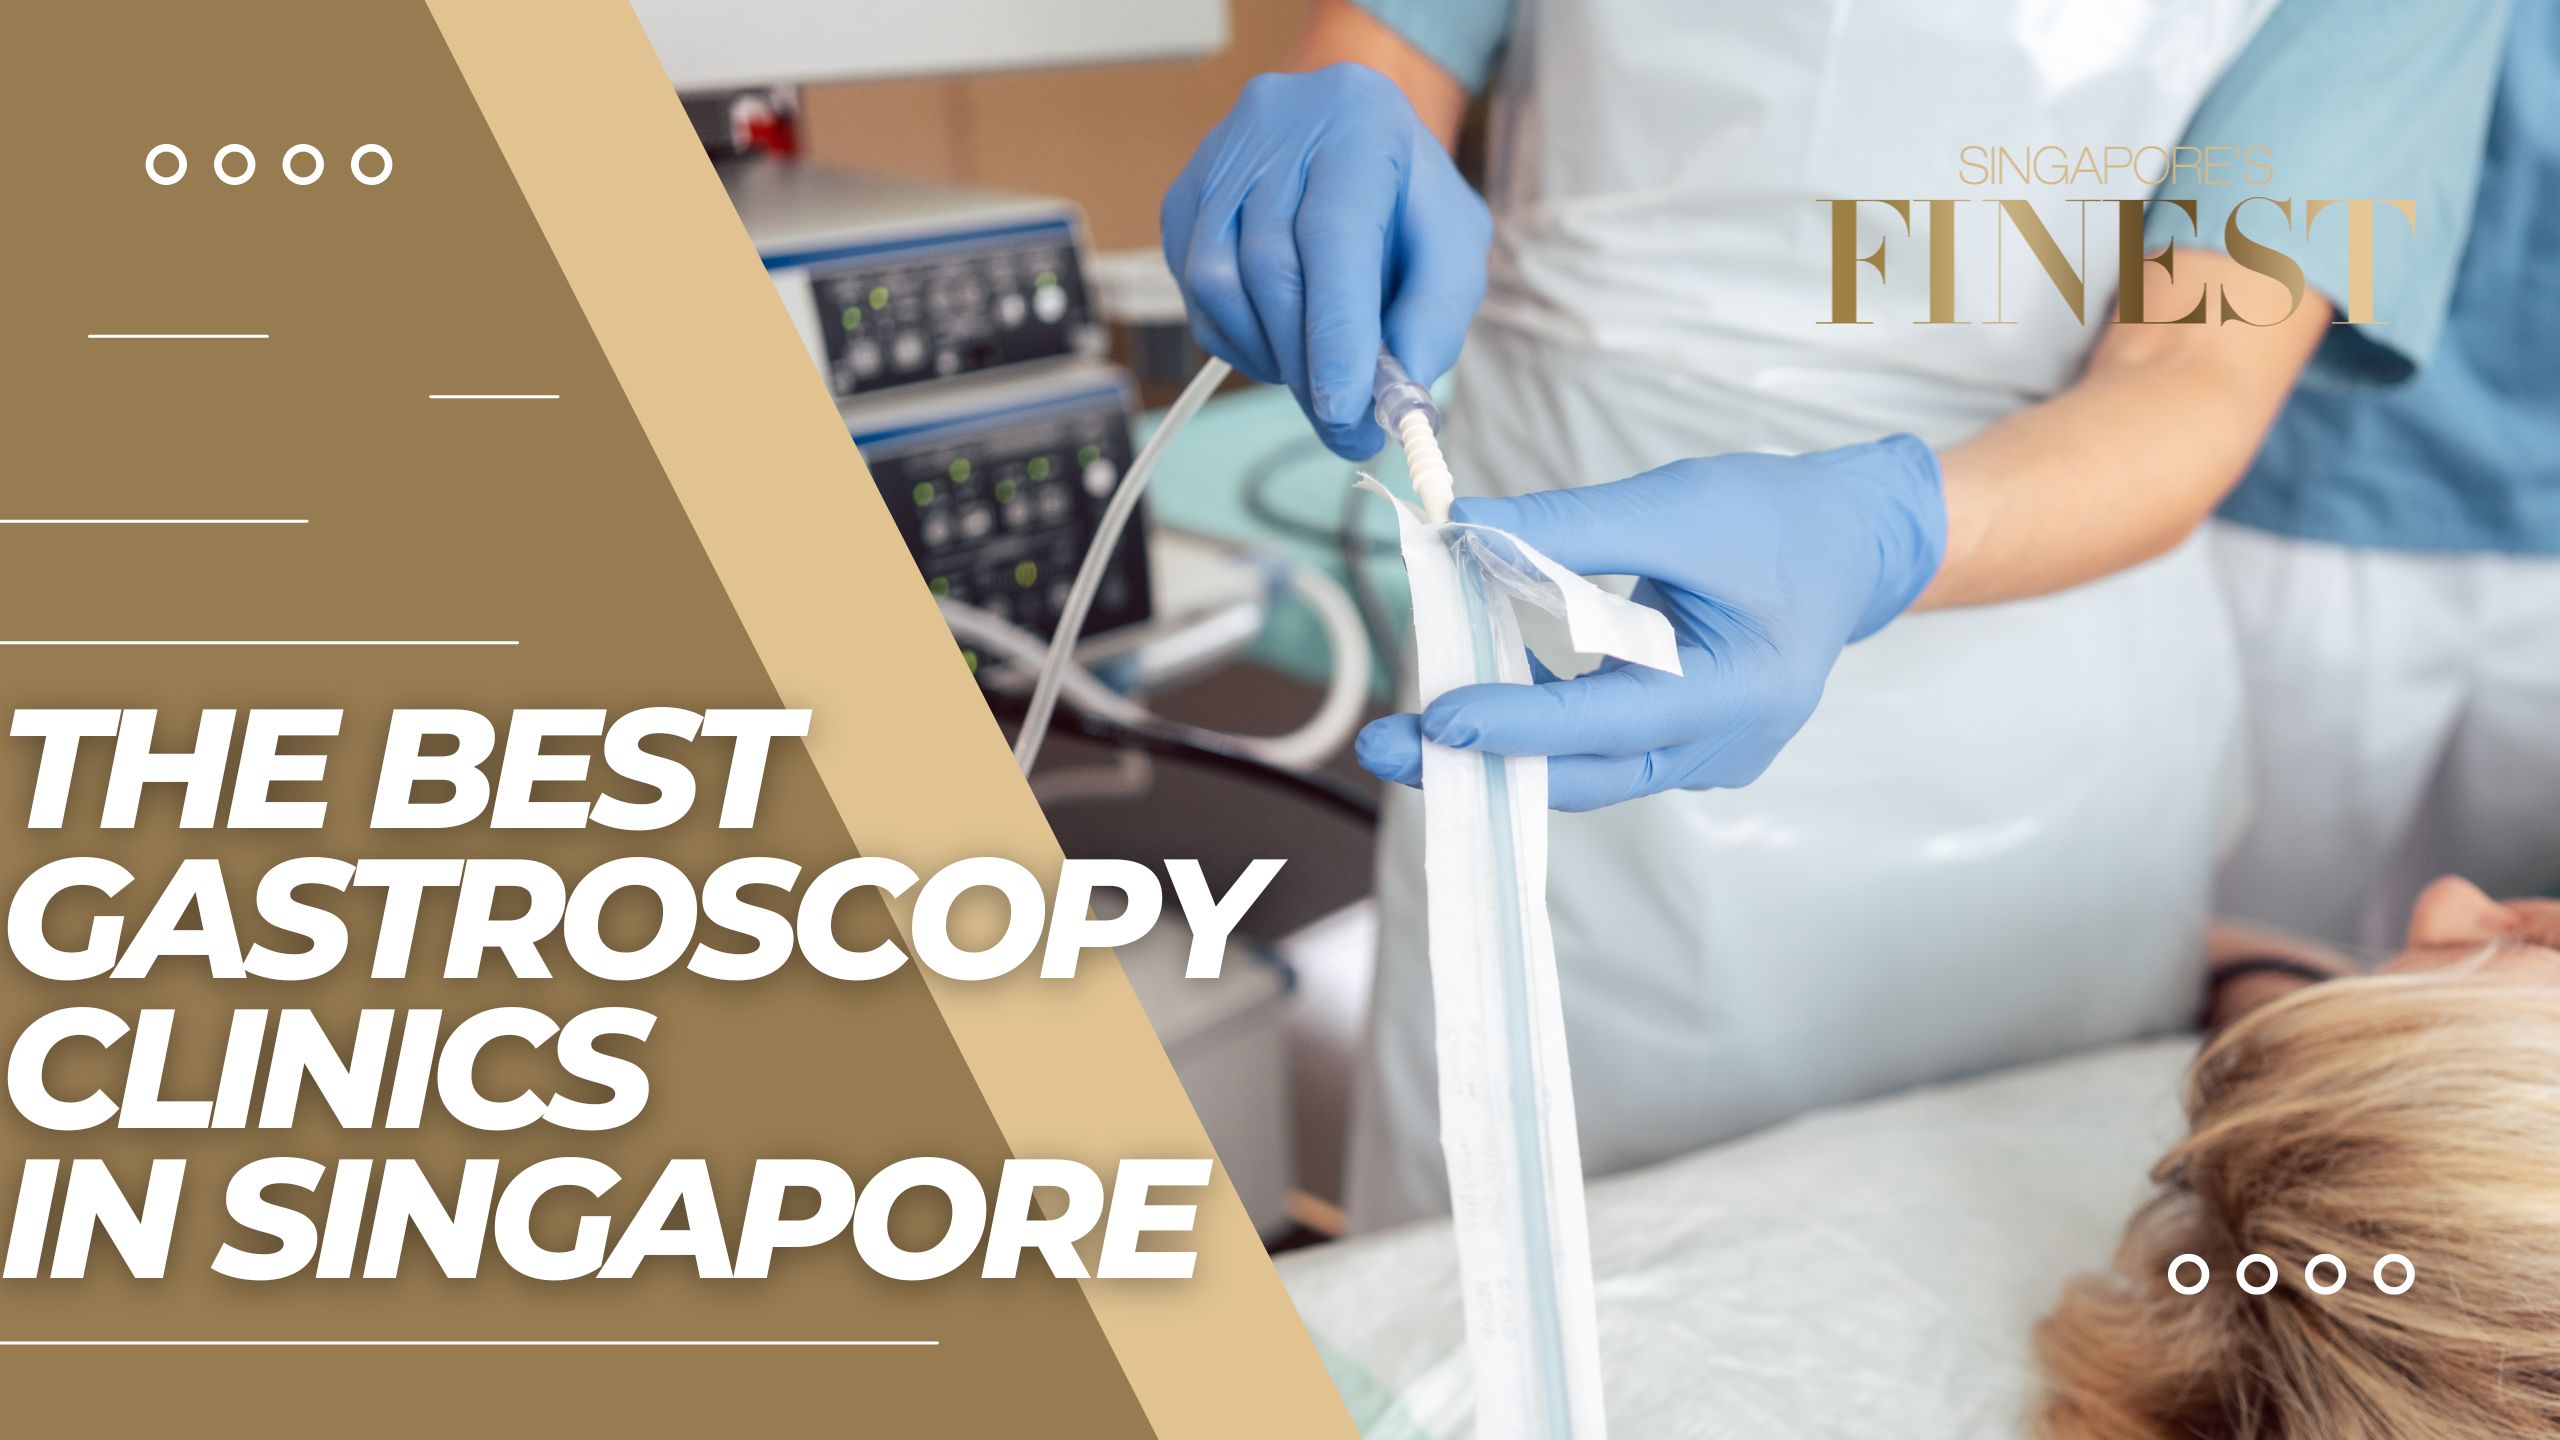 The Finest Gastroscopy Clinics in Singapore